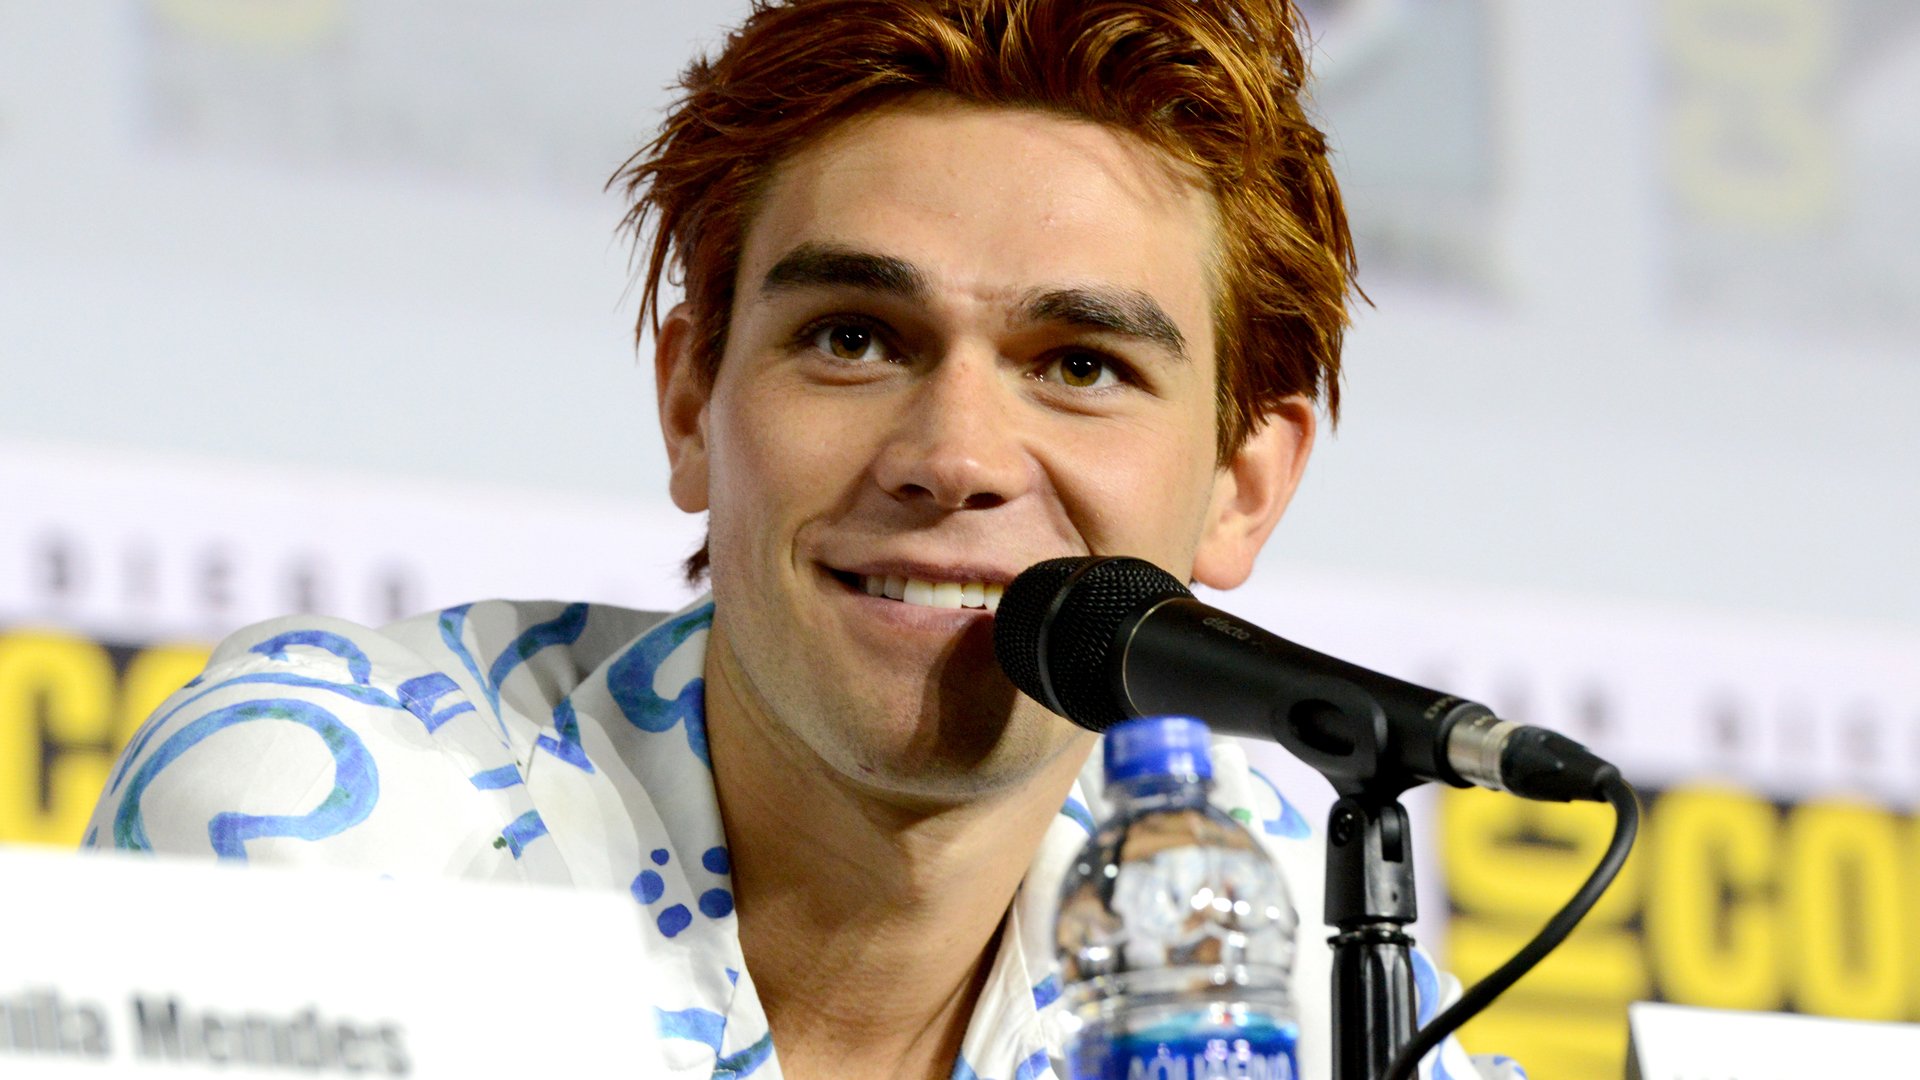 KJ Apa speaks at the "Riverdale" Special Video Presentation and Q&A during 2019 Comic-Con International at San Diego Convention Center on July 21, 2019 in San Diego, California.